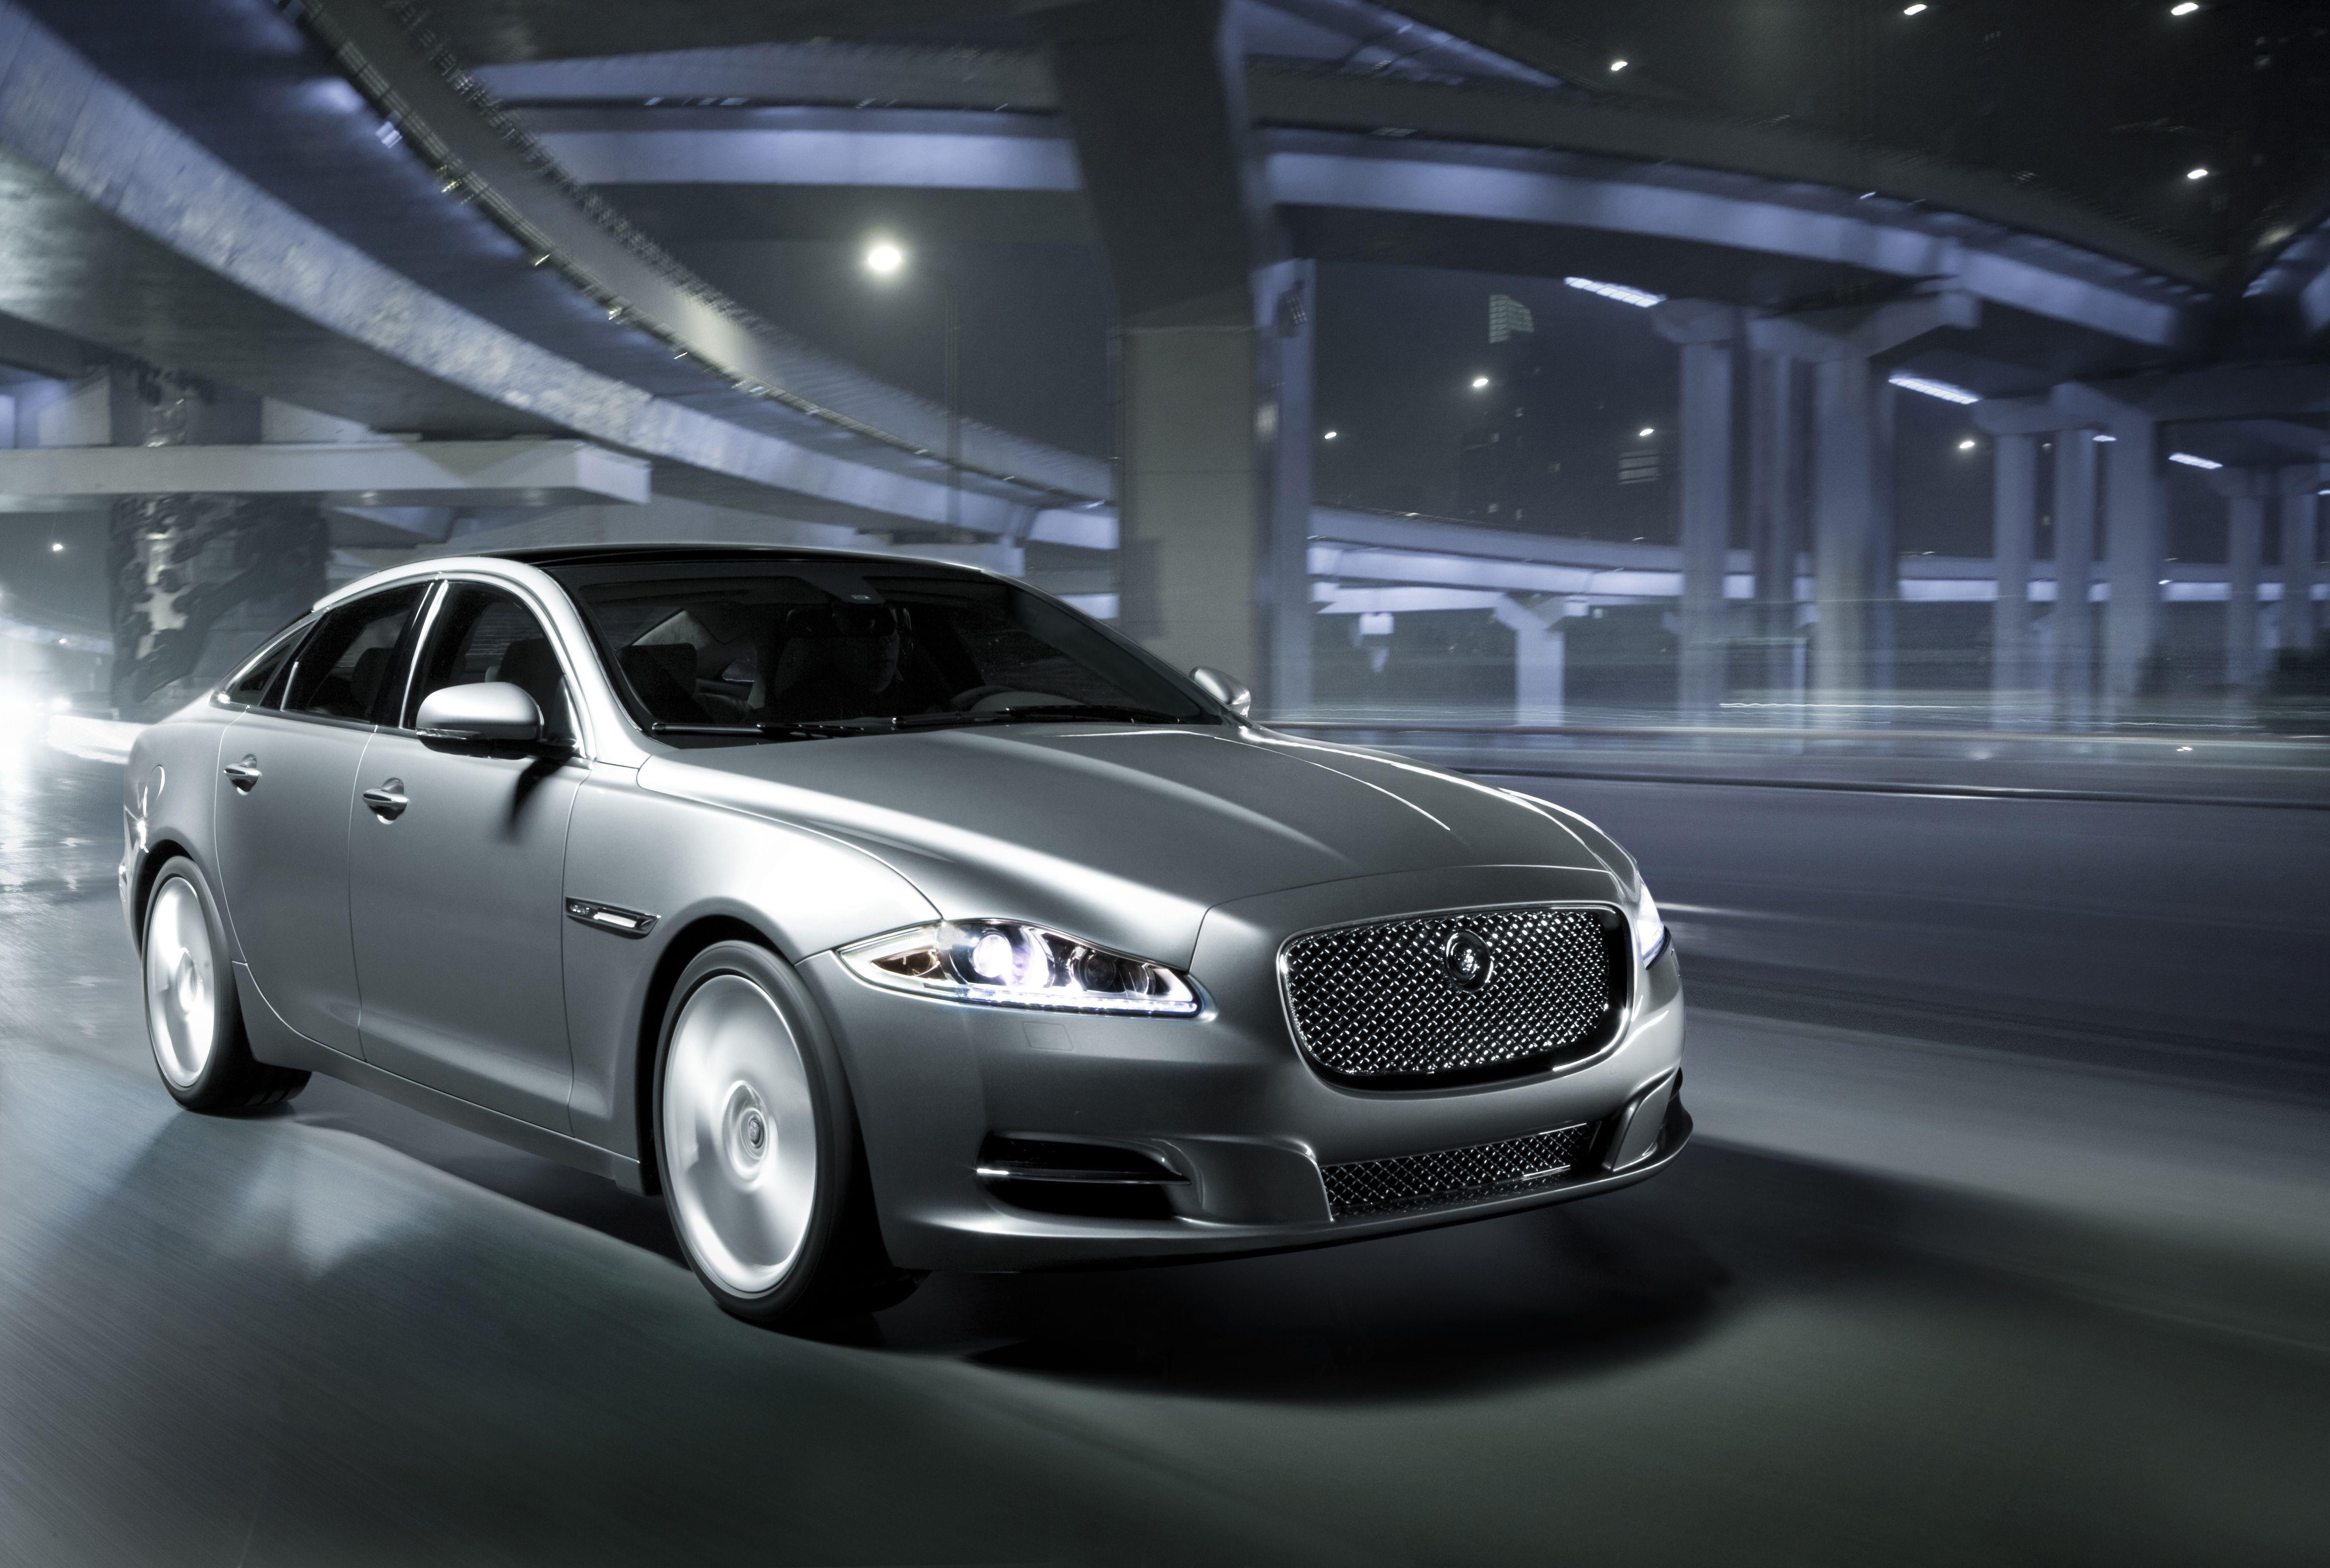 Wallpaper Silver Jaguar Xj Luxury Car Image HD With Cars Download